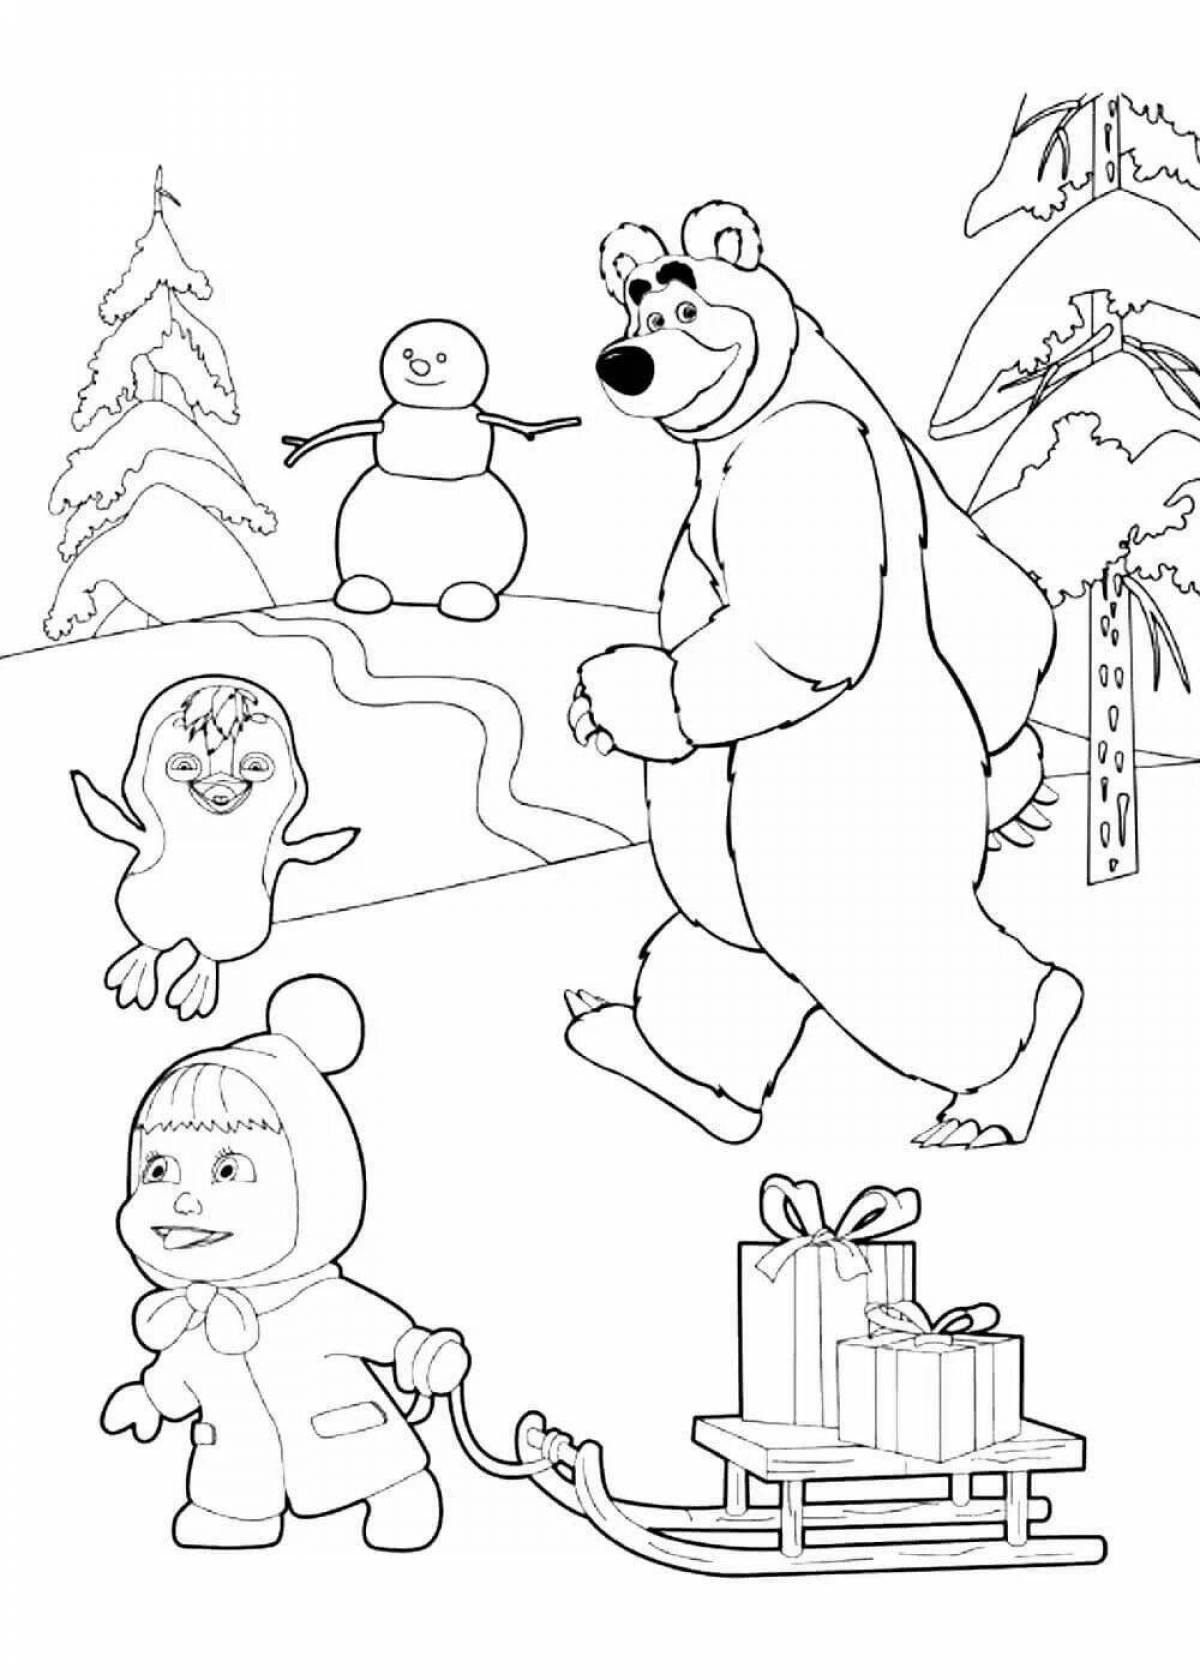 Colorful bright masha and the bear coloring book